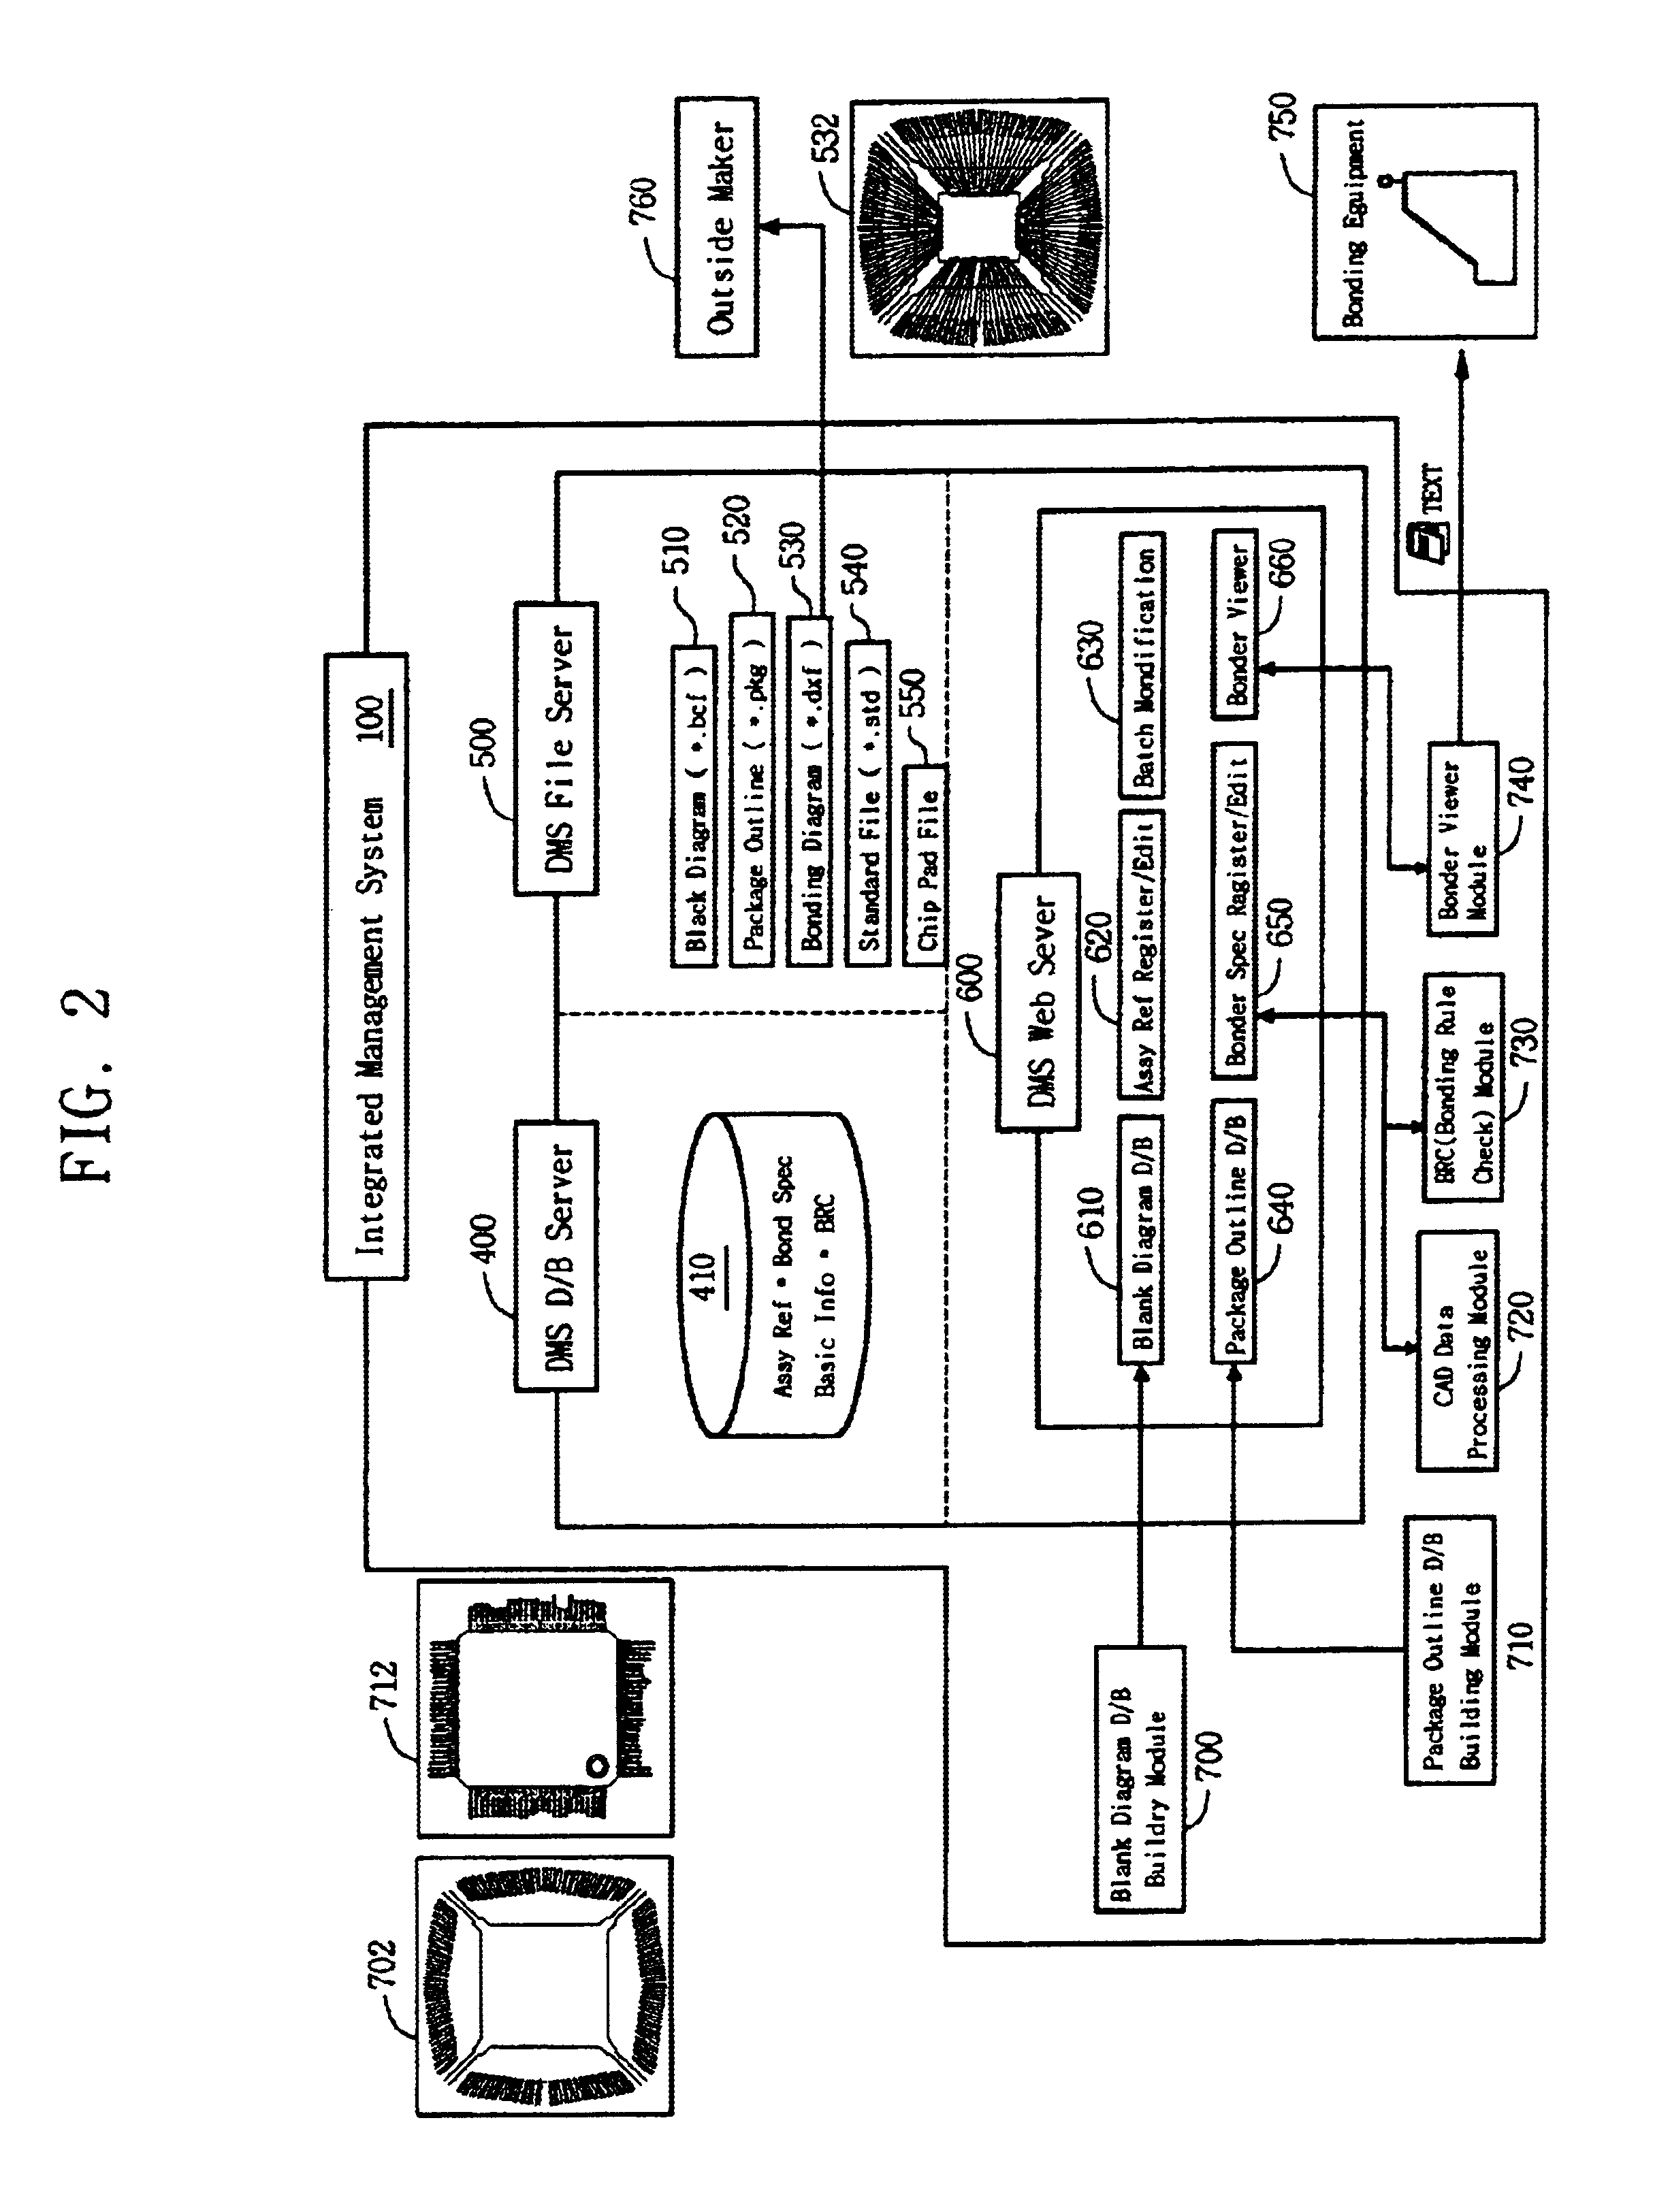 Management system for automated wire bonding process